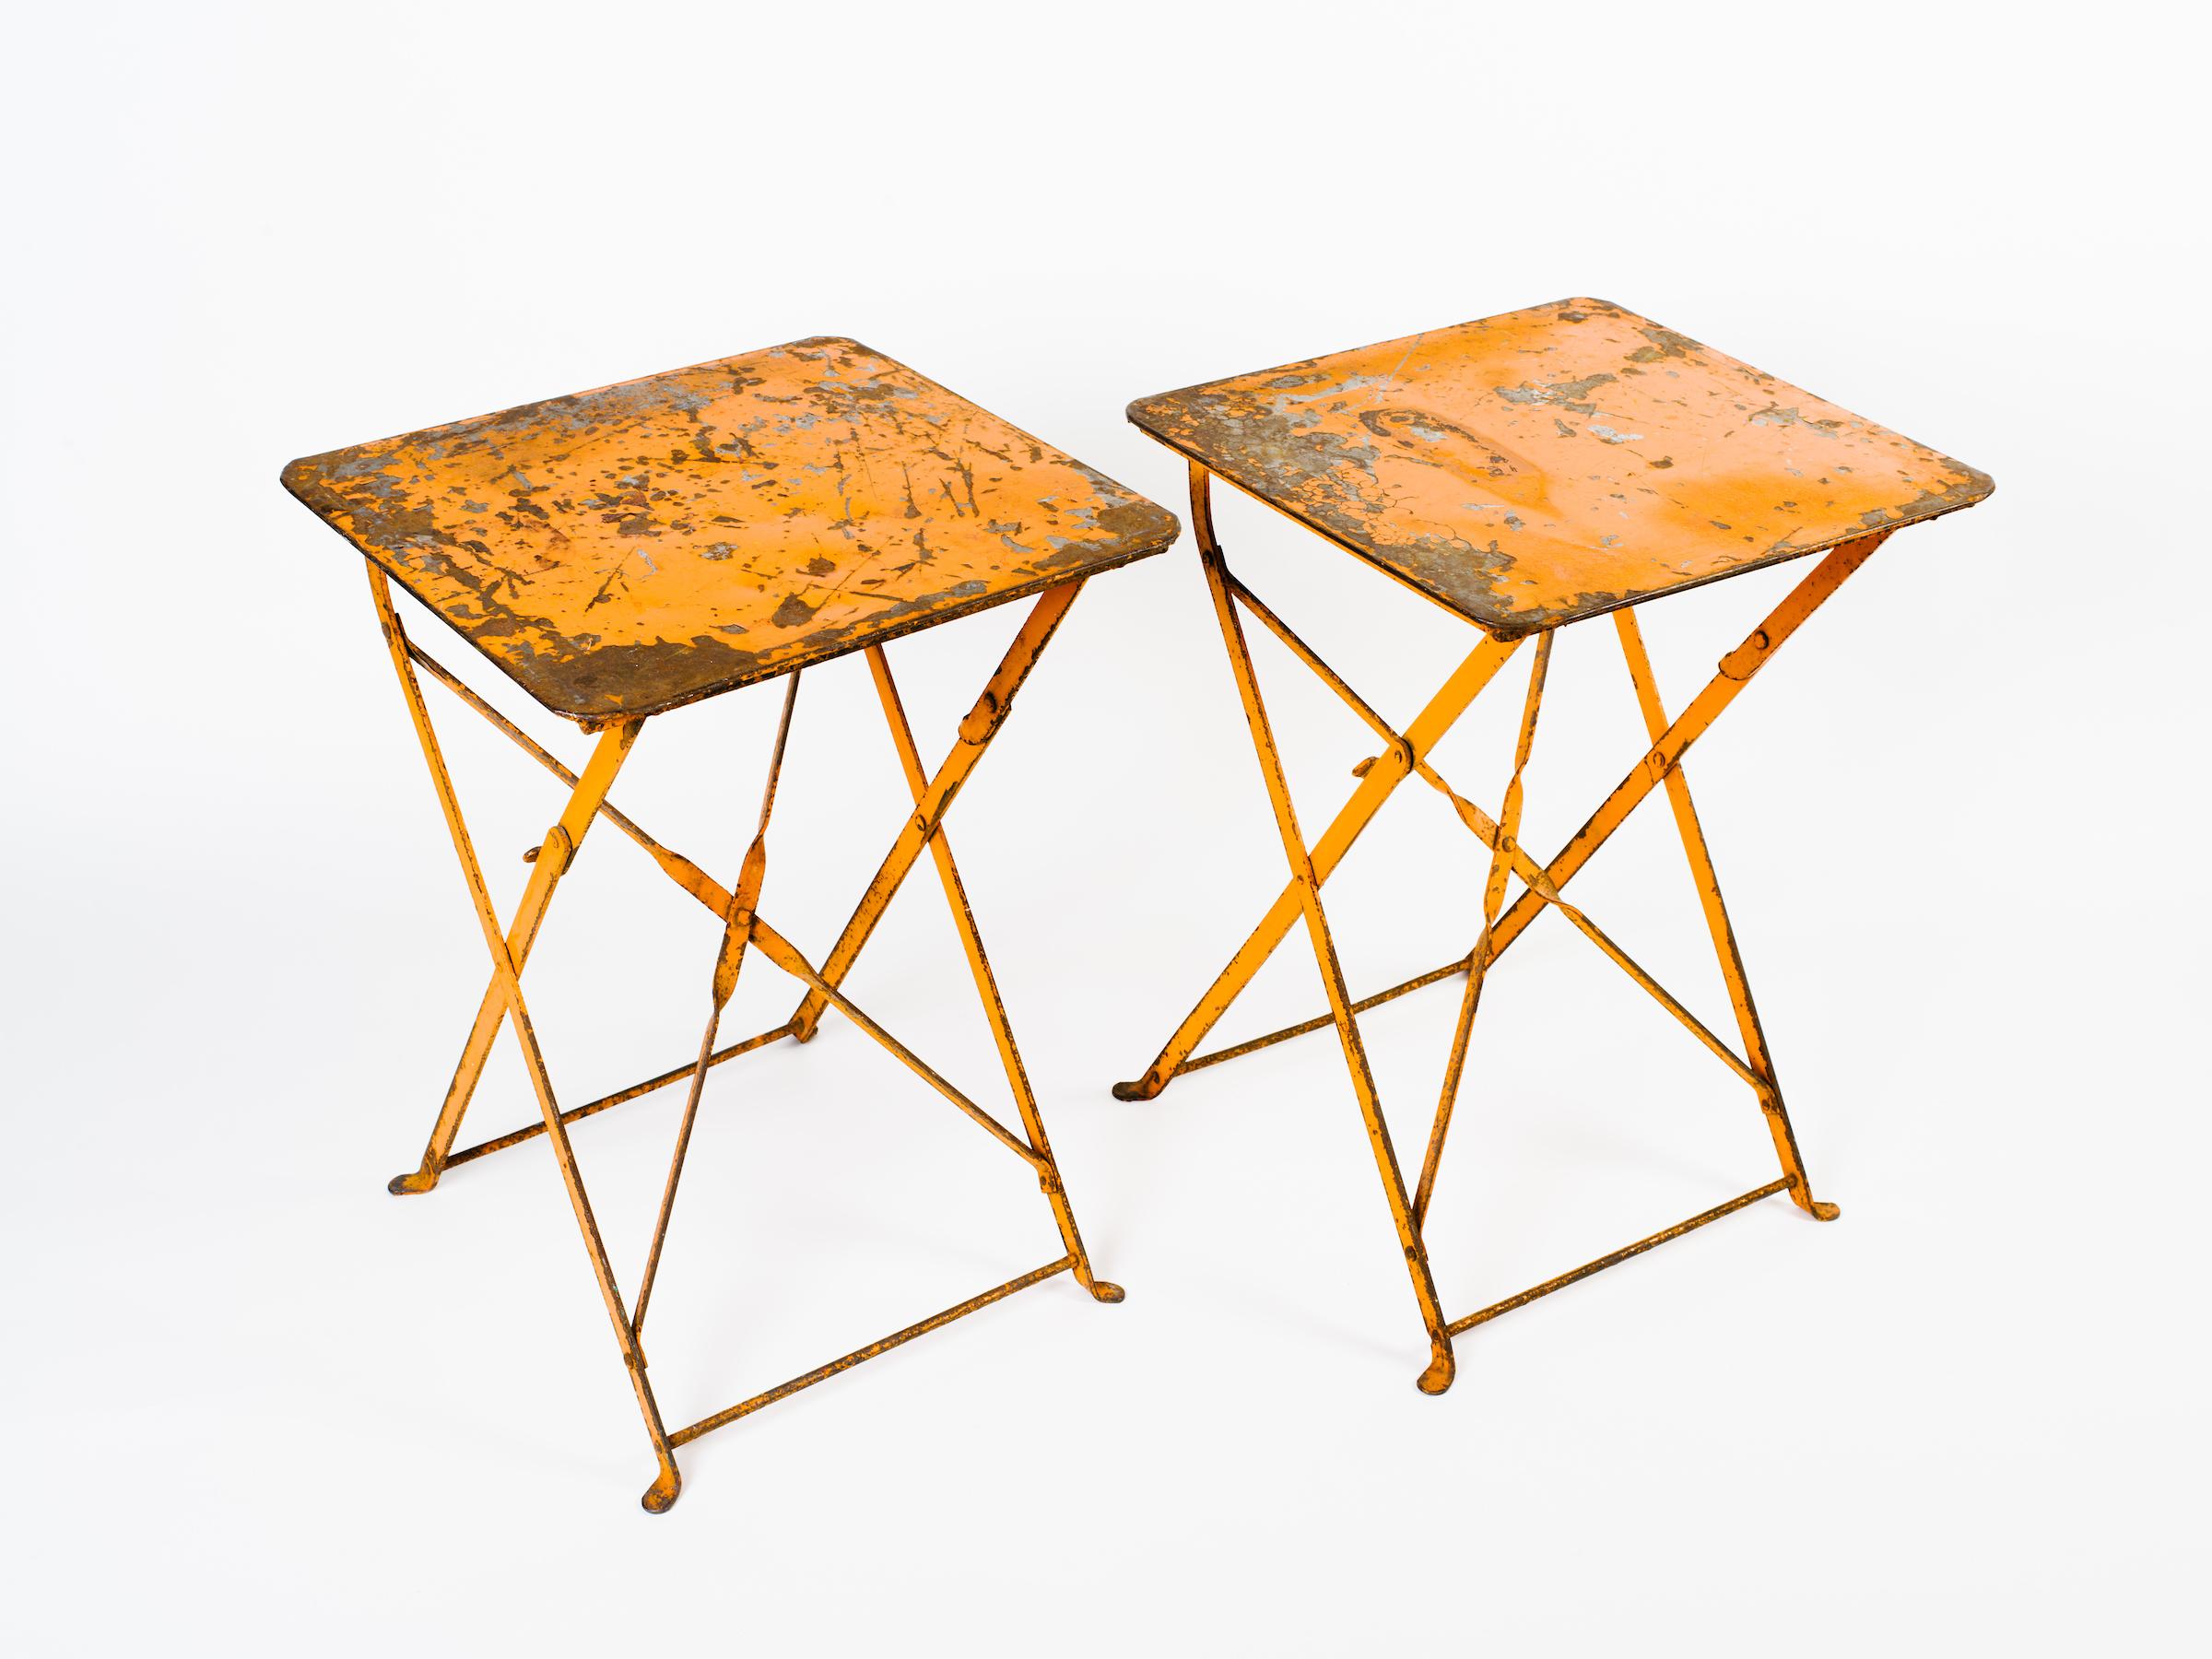 Industrial Pair of French Antique Garden Tables in Distressed Orange Iron, c. 1930's